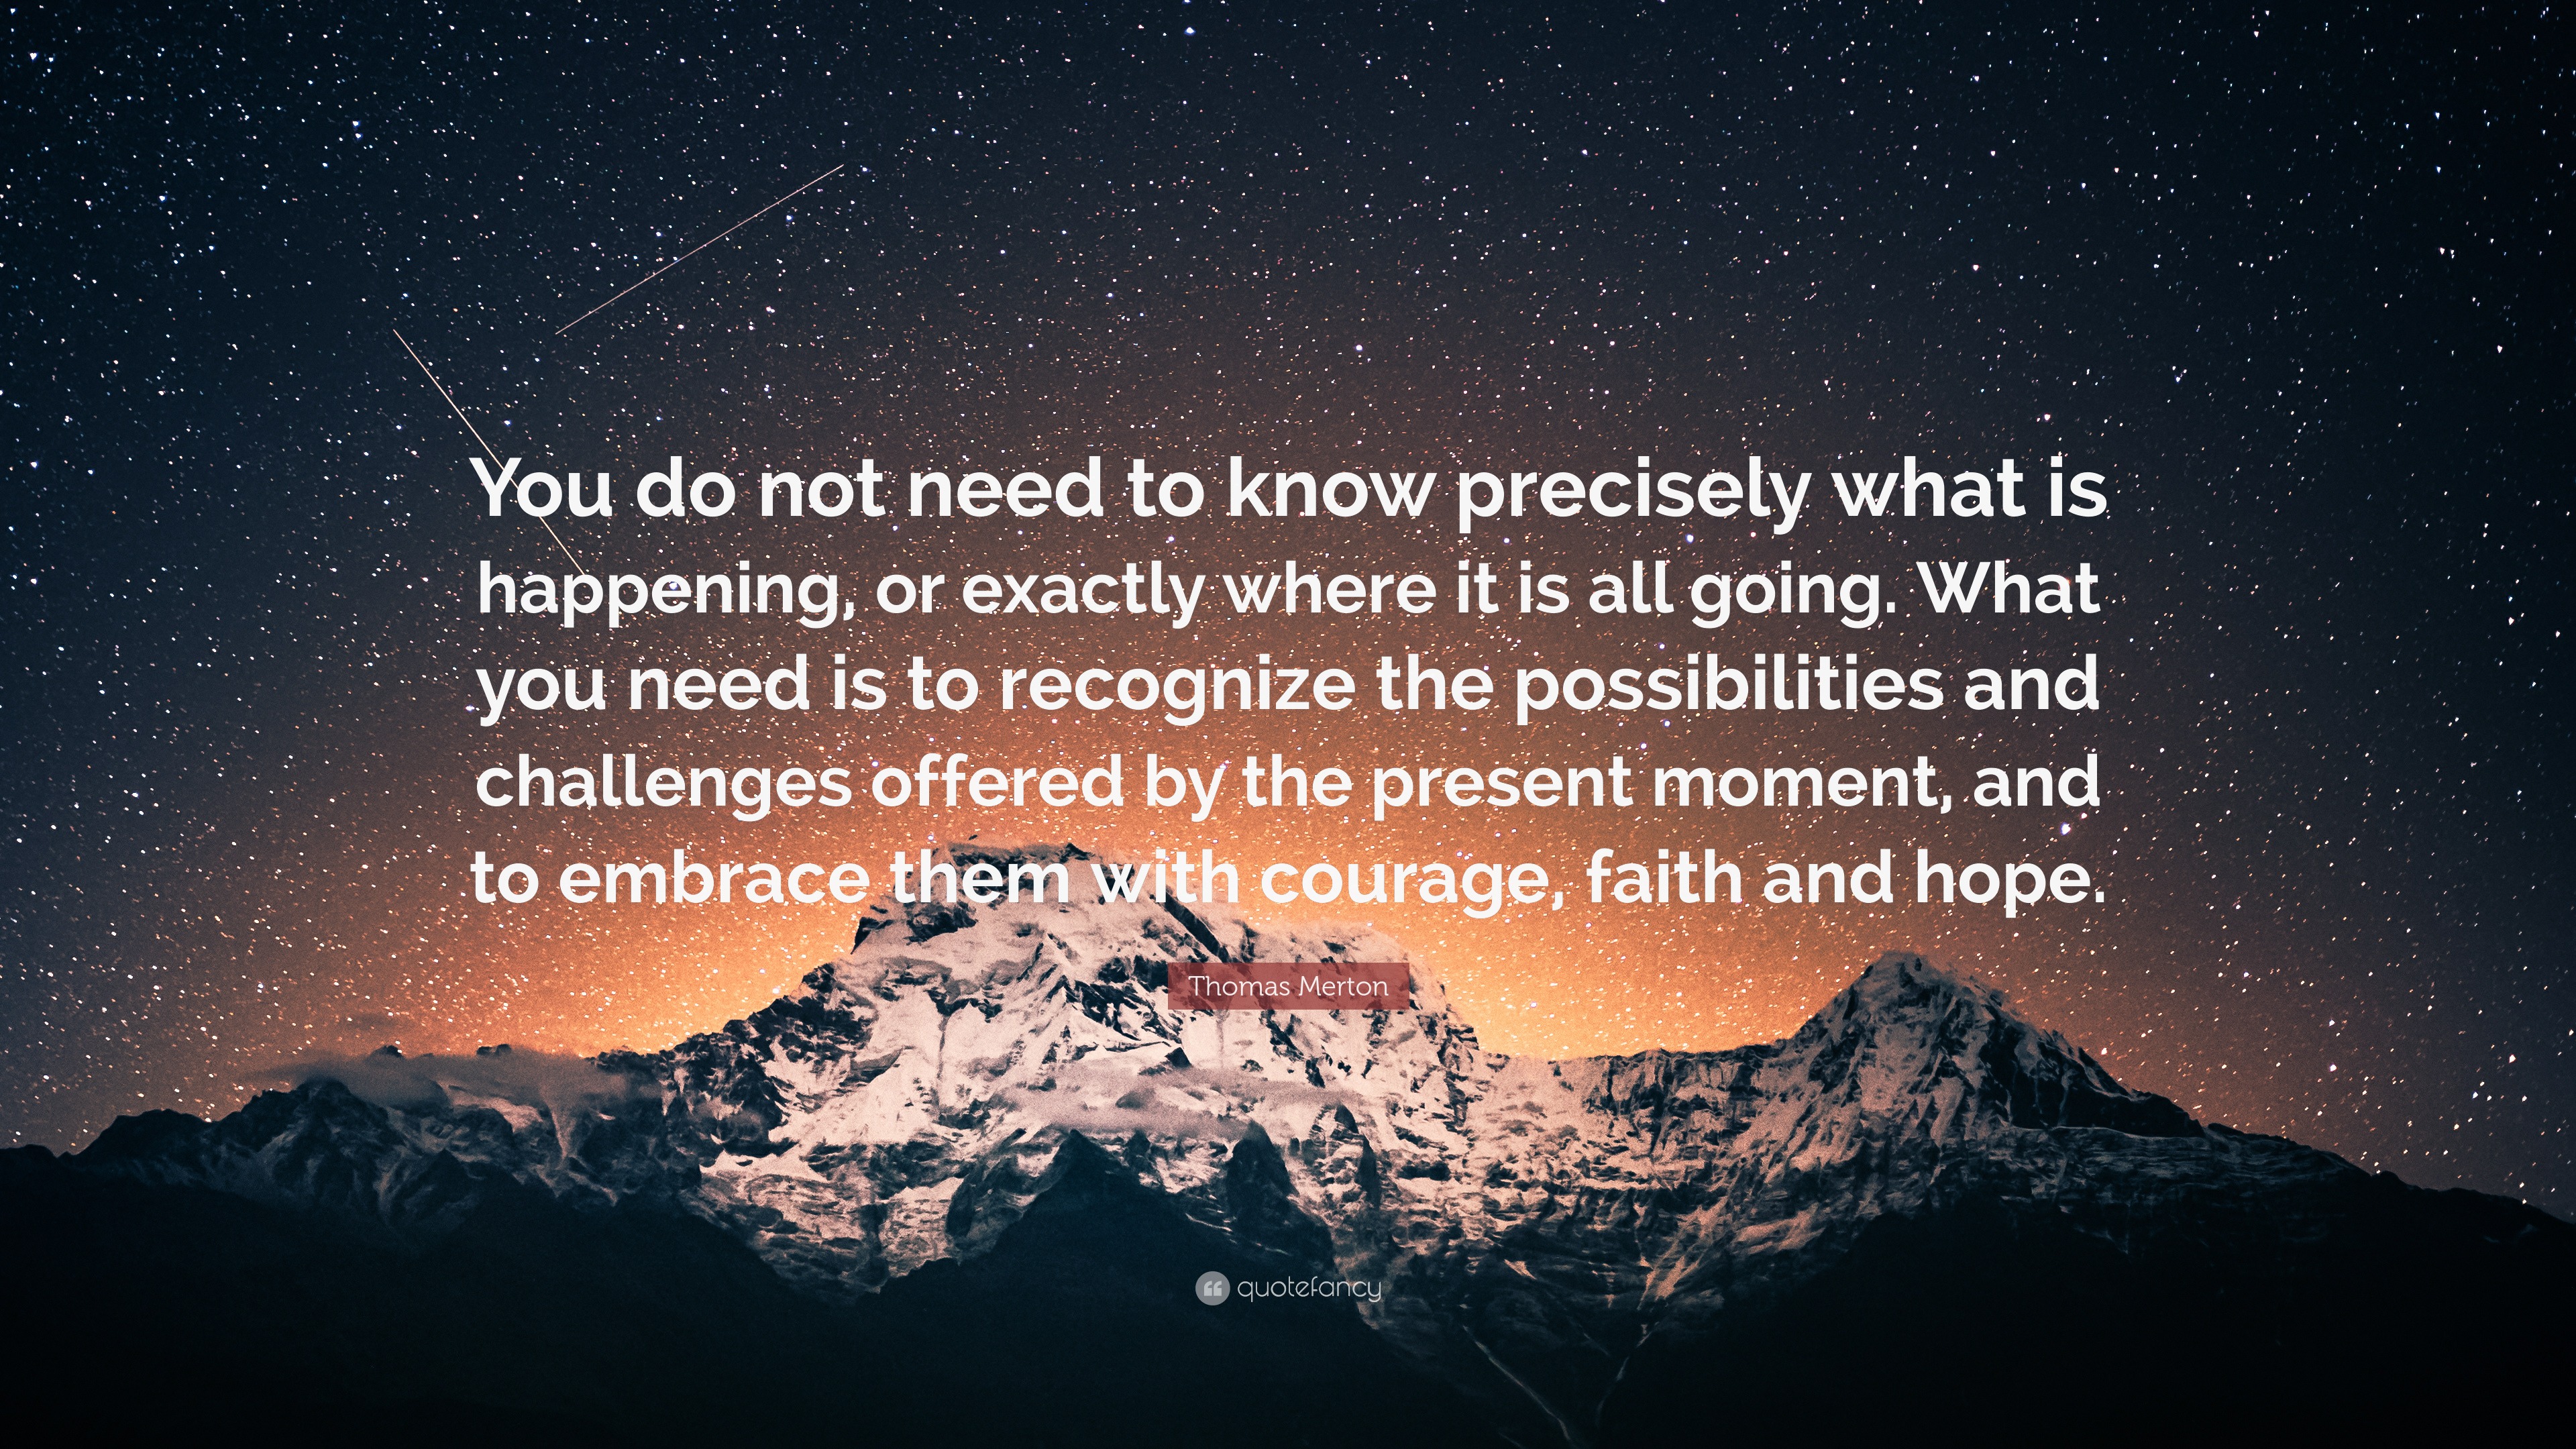 2021371 Thomas Merton Quote You do not need to know precisely what is